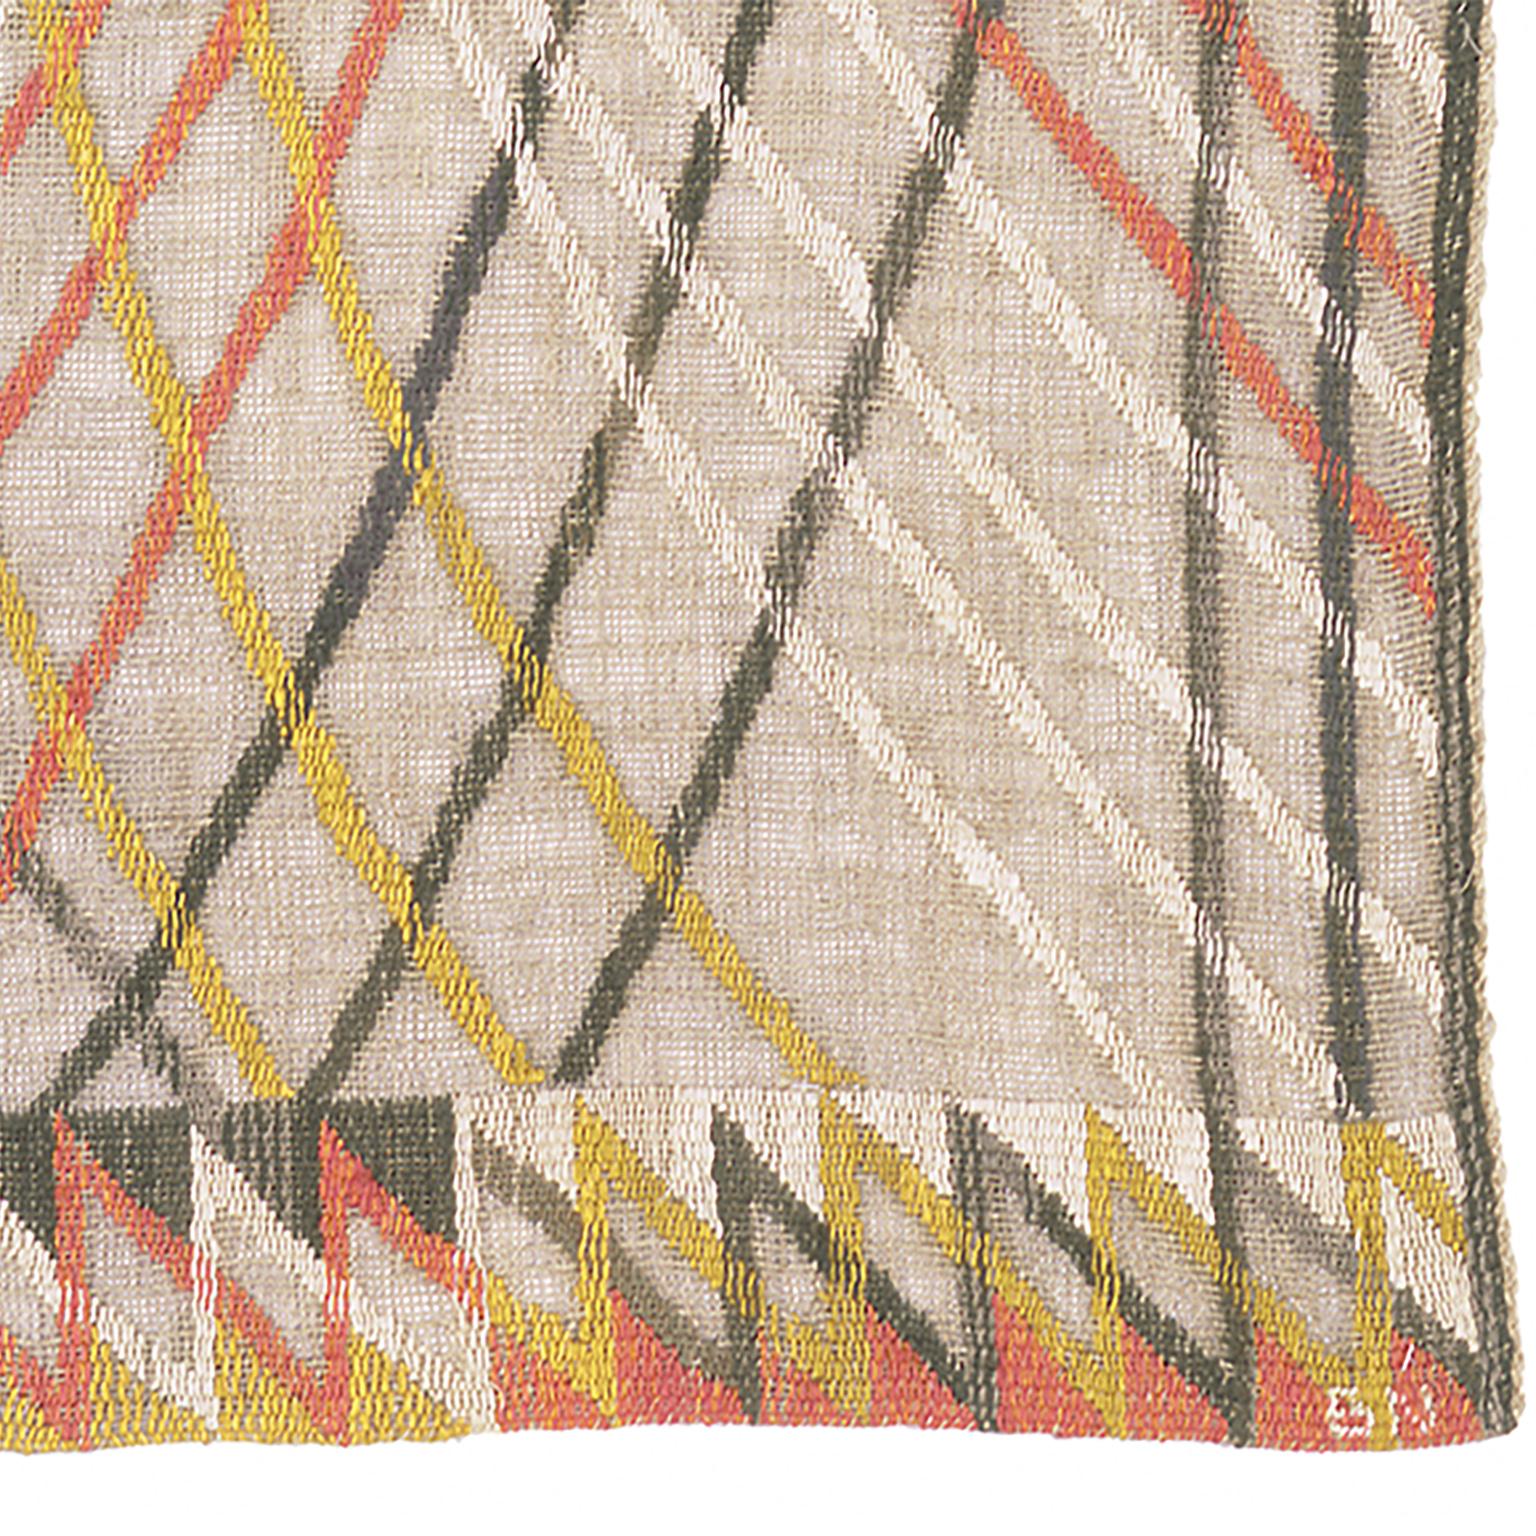 Wool Mid-20th Century Swedish Wall Hanging by Barbro Nilsson, AB MMF For Sale